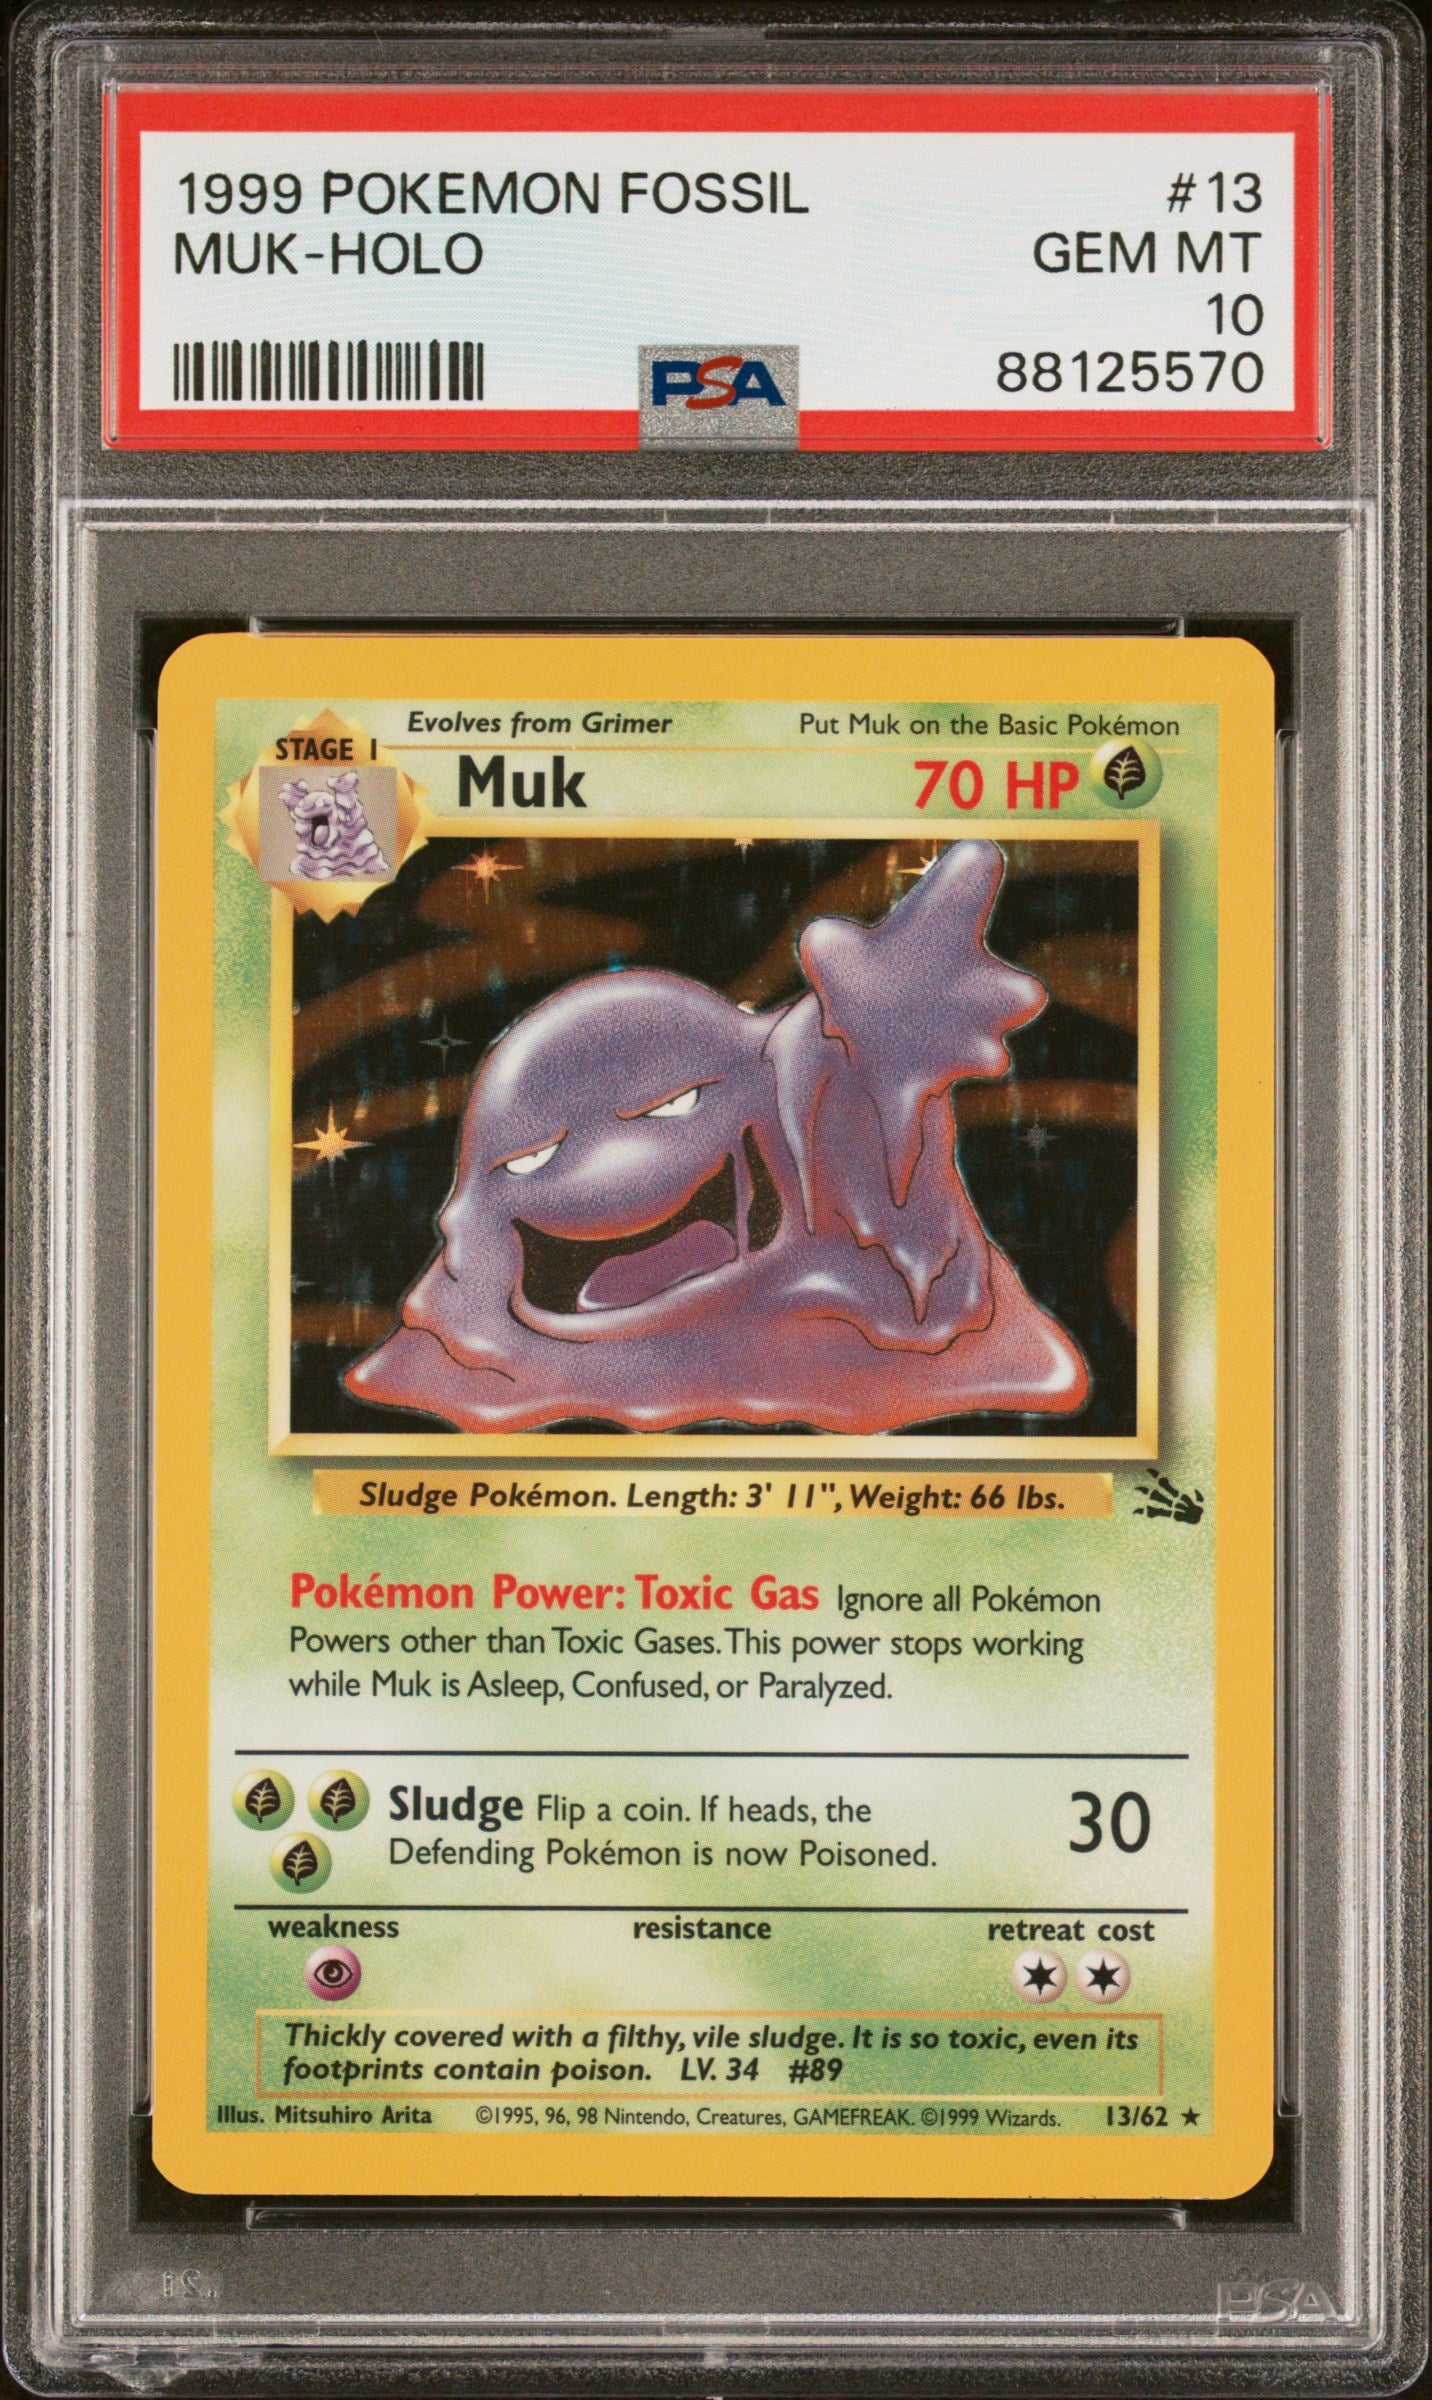 PSA 10 Muk Fossil Holo (Graded Card)